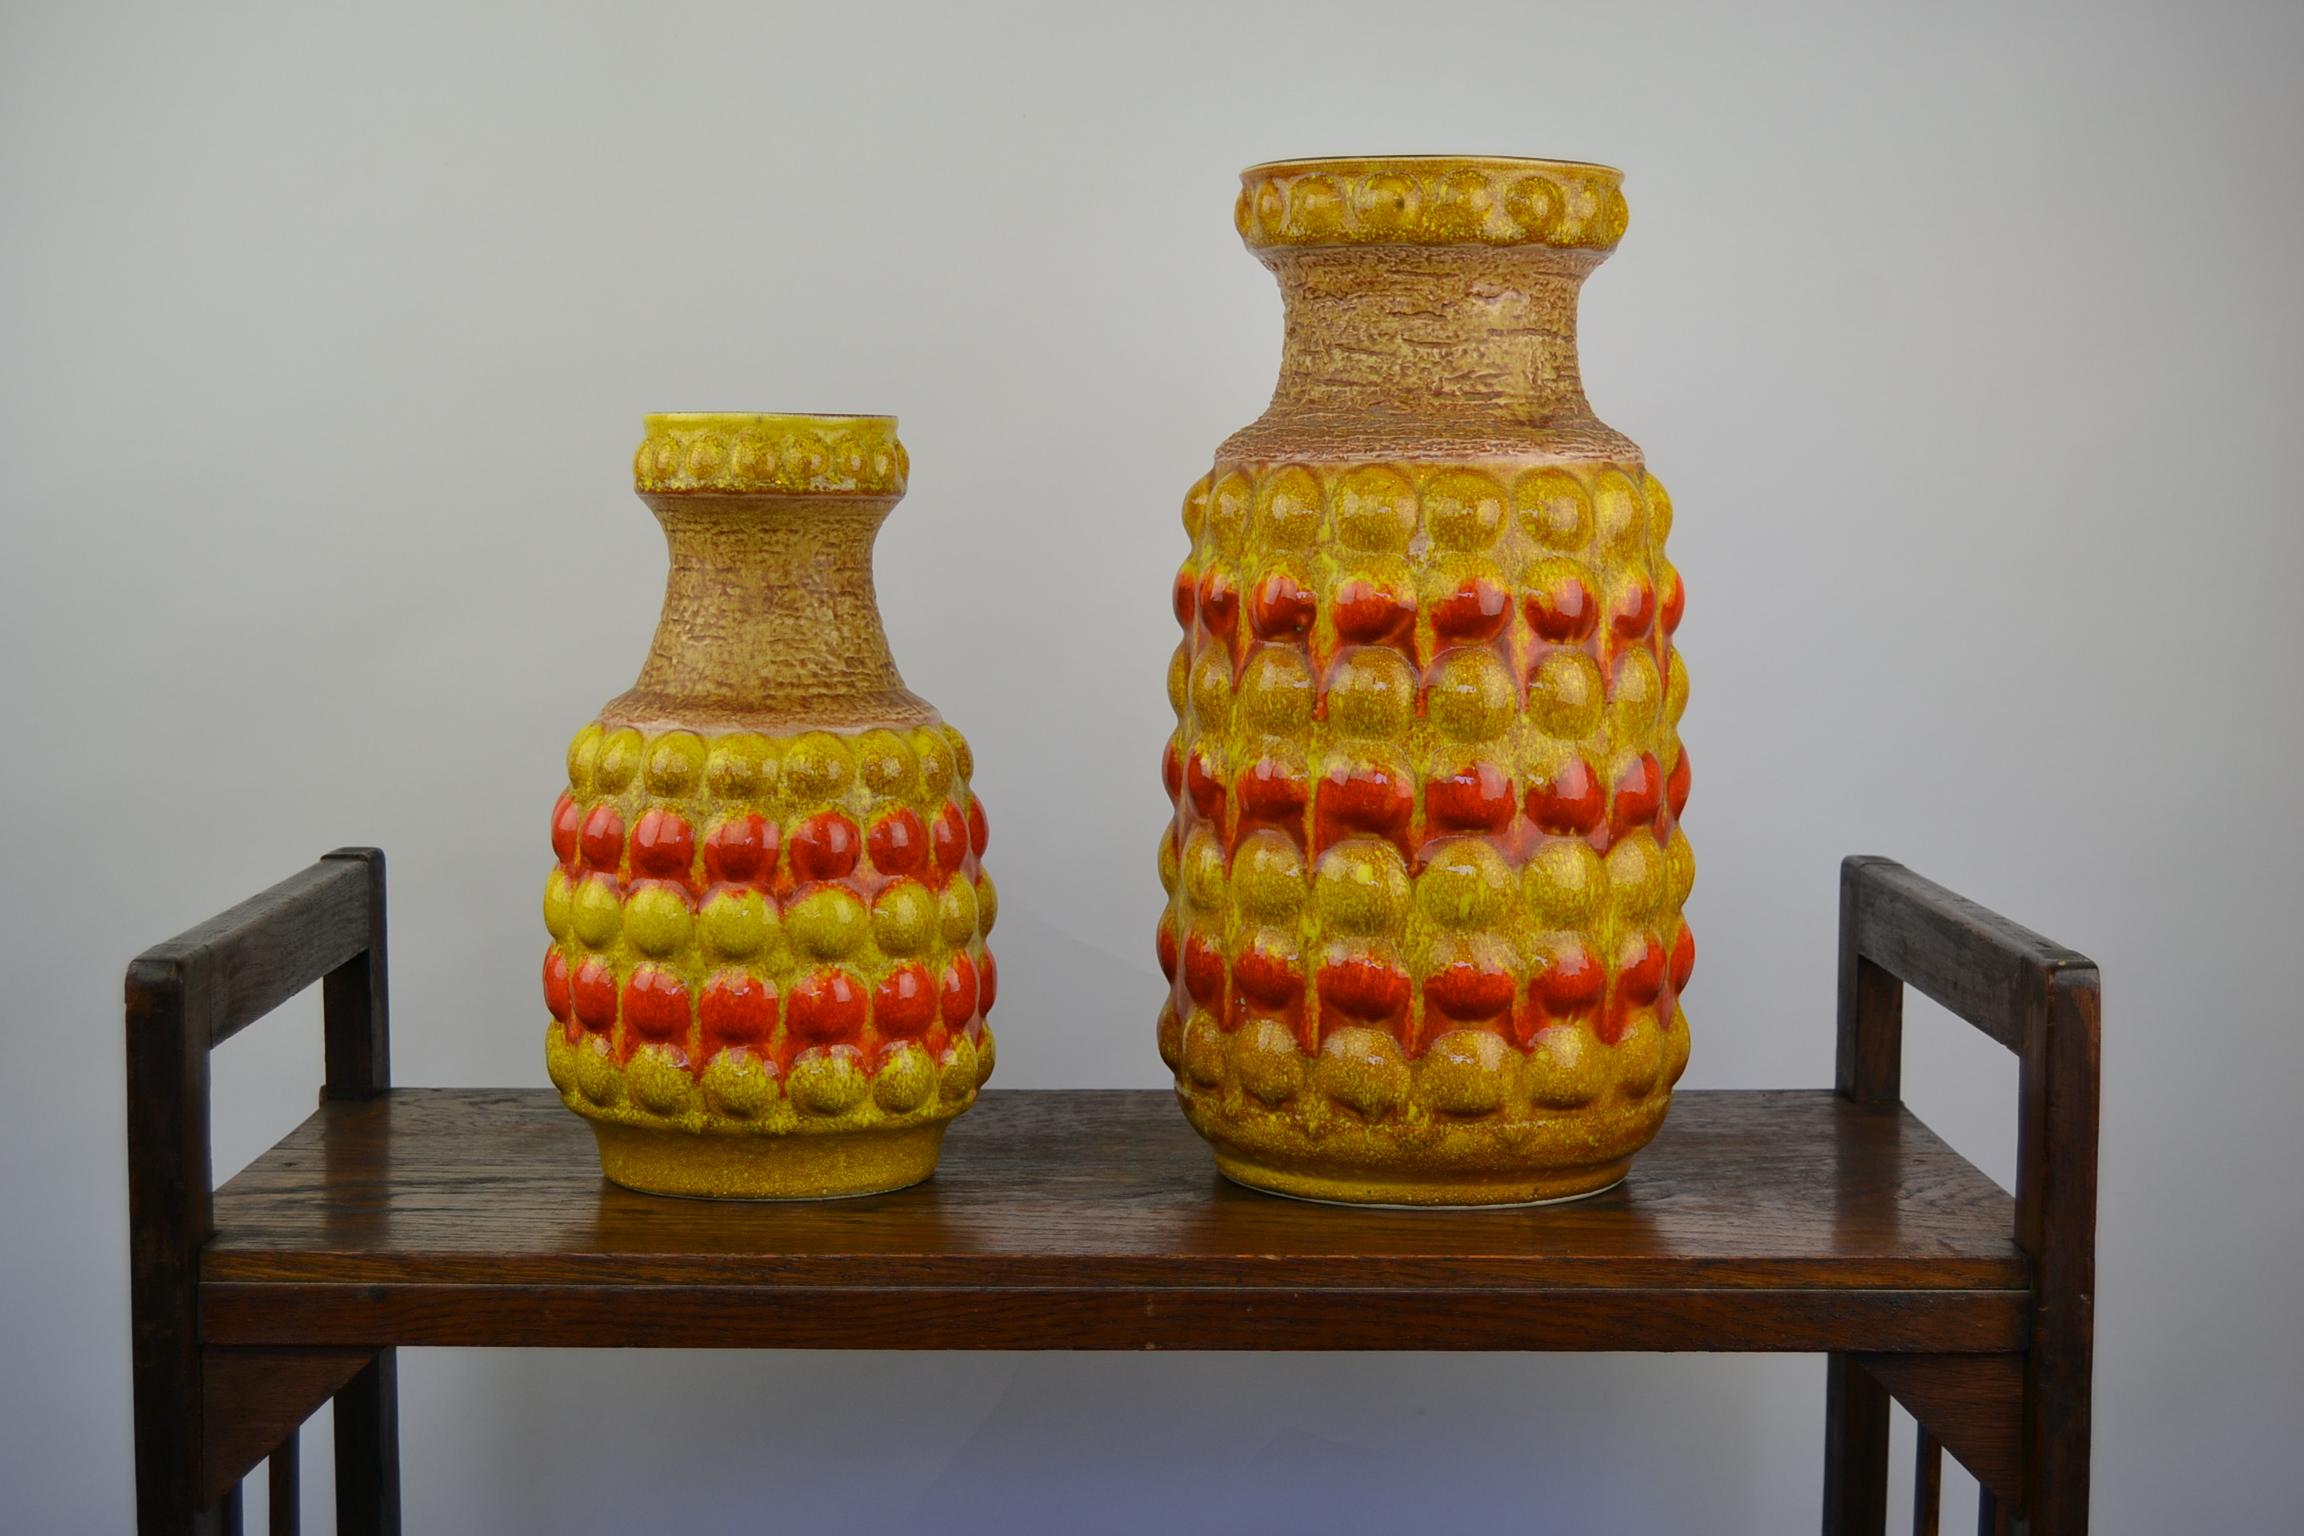 Set of 2 Art Pottery Vases - Fat Lava Vases. 
Bubbled Vases with the colors Yellow and Orange. 
These Ceramic Vases date from the 1960s and were made in Western Germany by Bay Keramic. 
They are 11,81 inch and 15,74 inch Heigh --- 30 cm and 40 cm